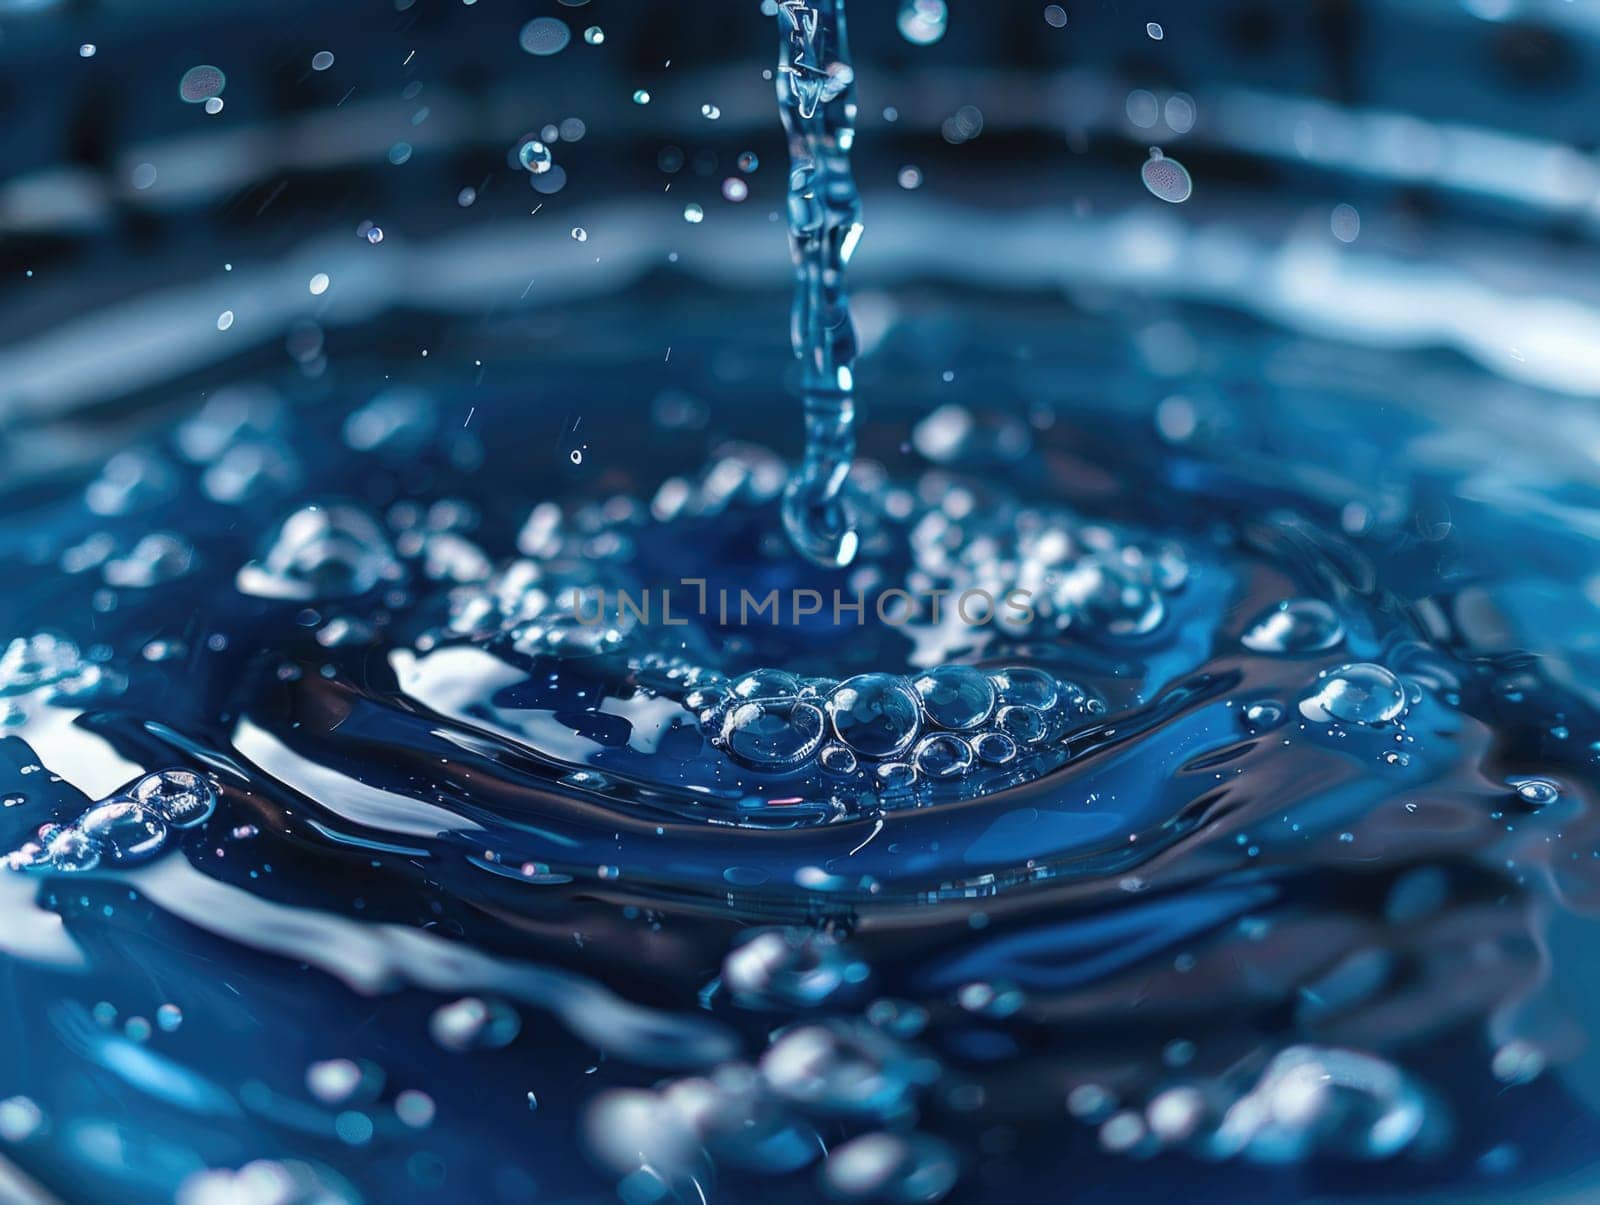 Close-up image of clear water droplets rippling on a reflective blue surface, depicting purity and tranquility.